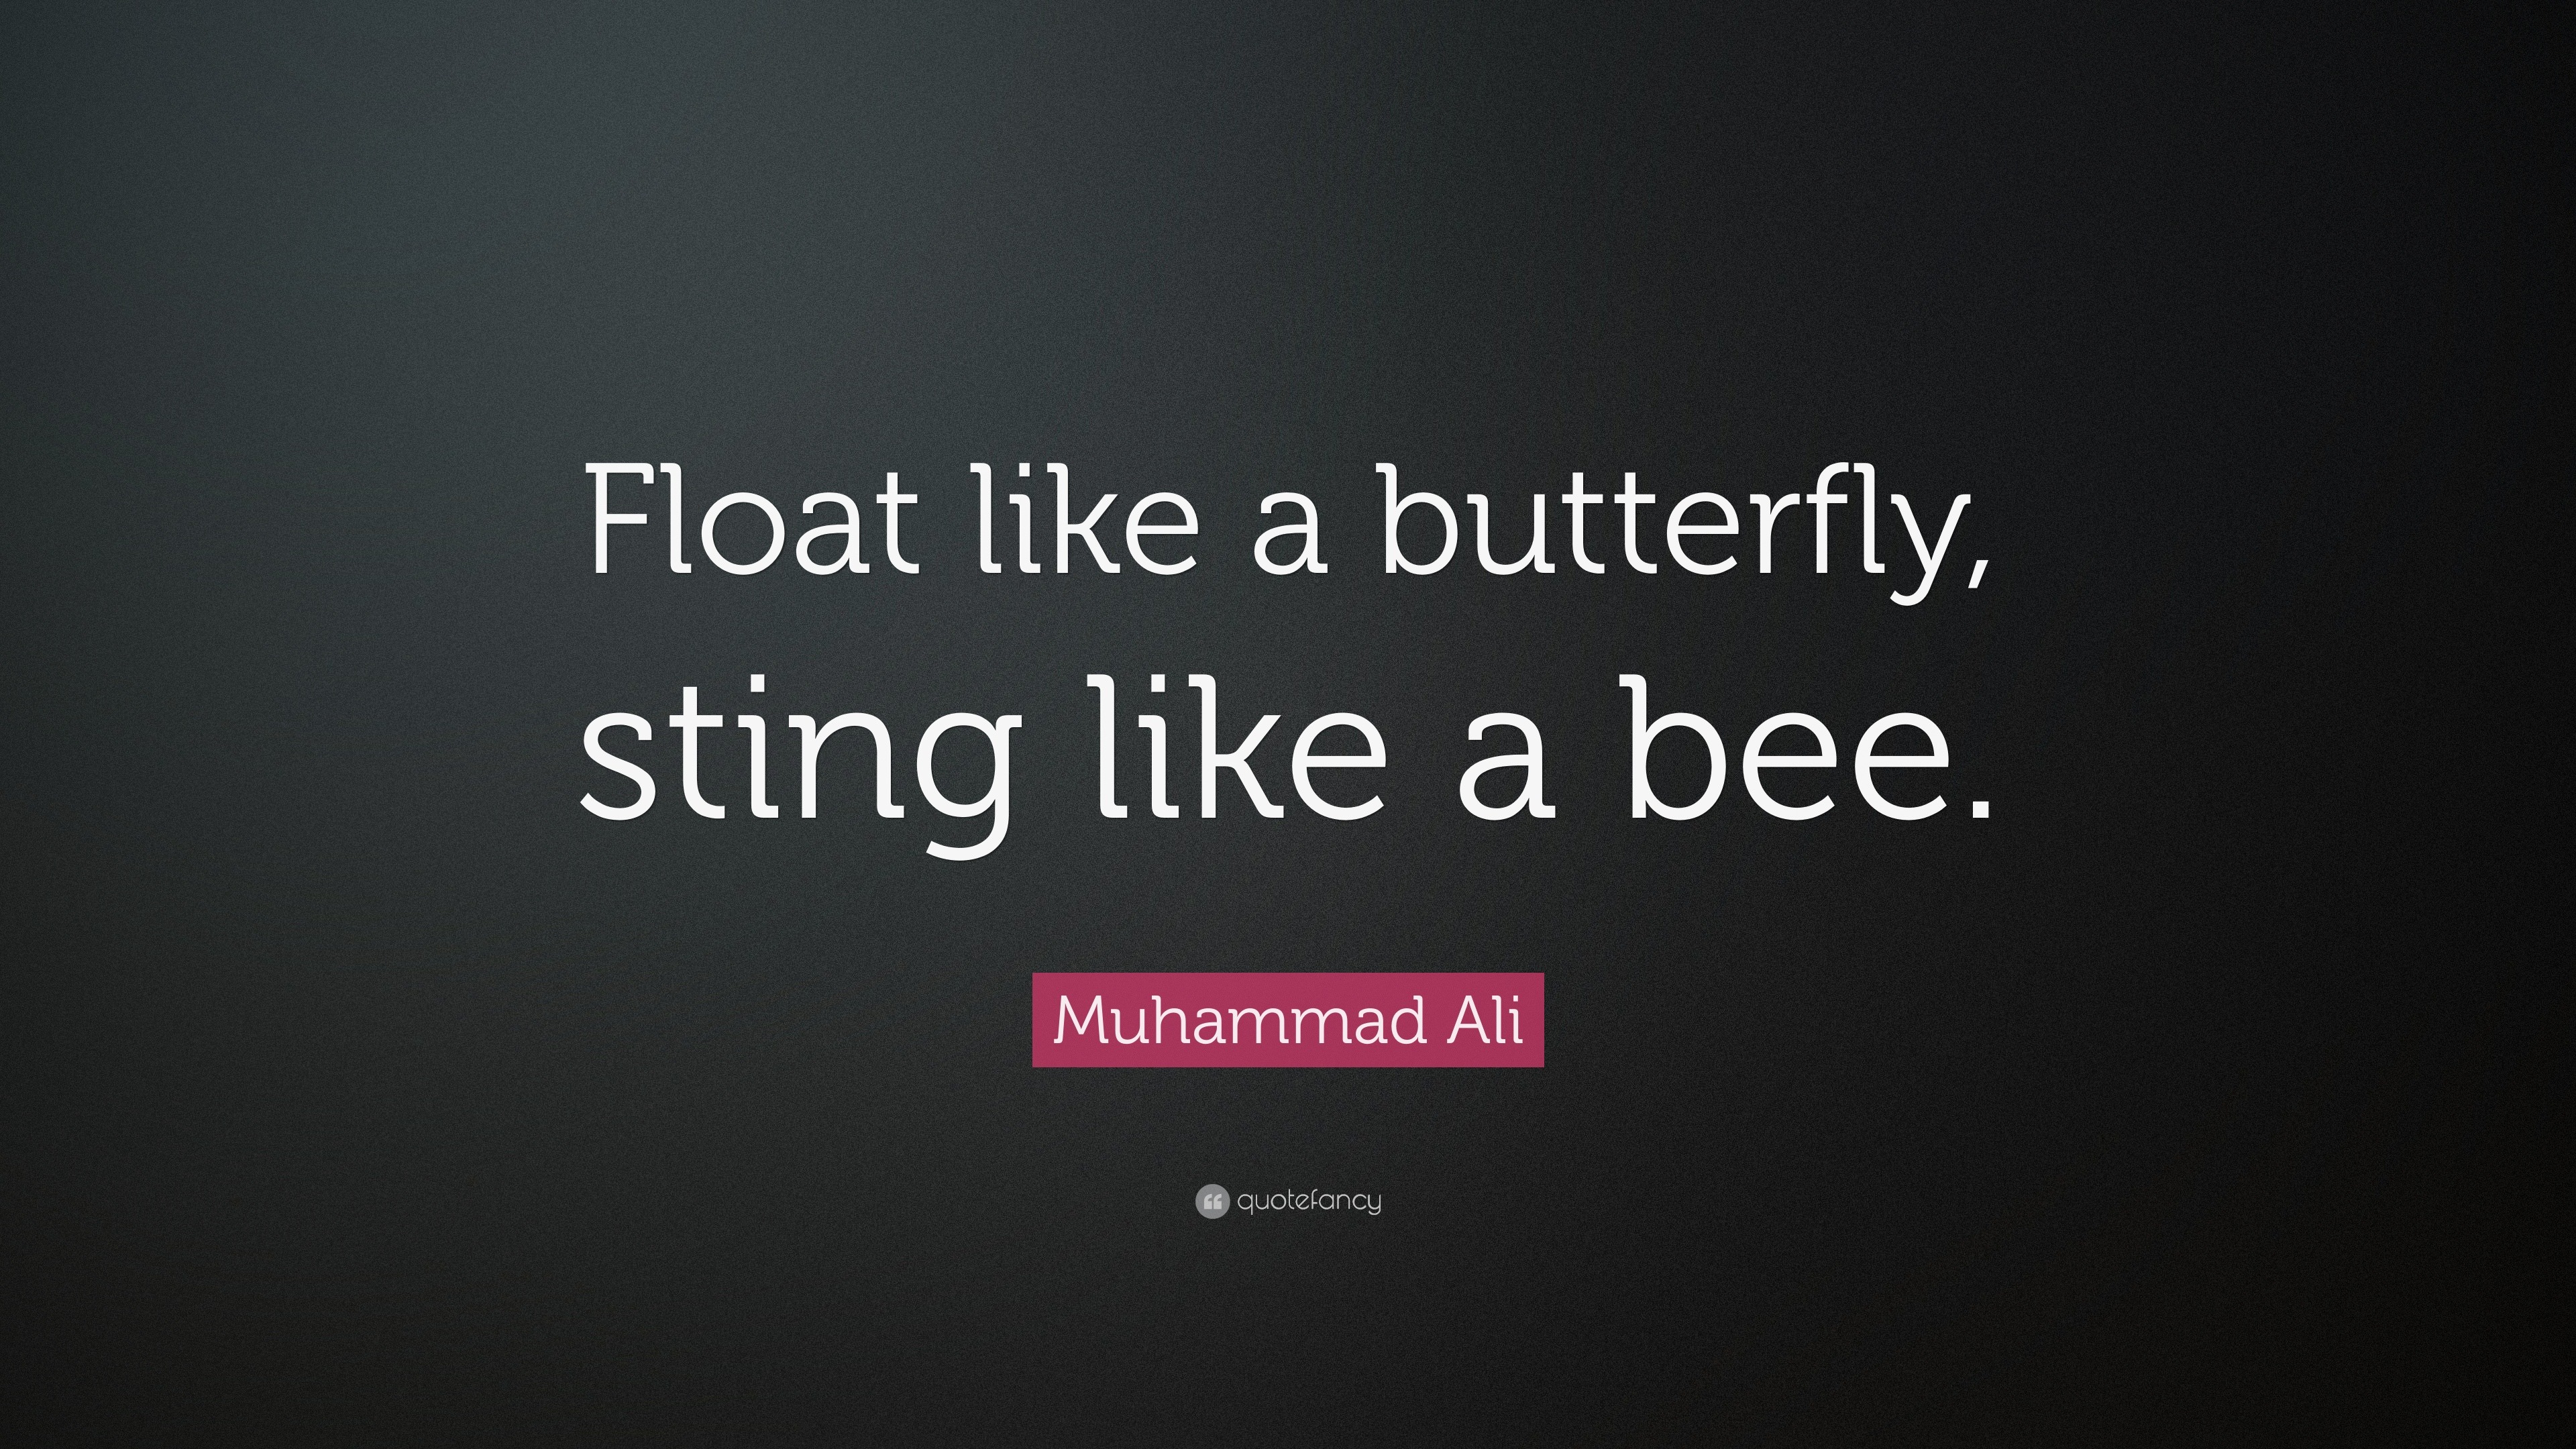 Muhammad Ali Quote “Float like a butterfly sting like a bee ”